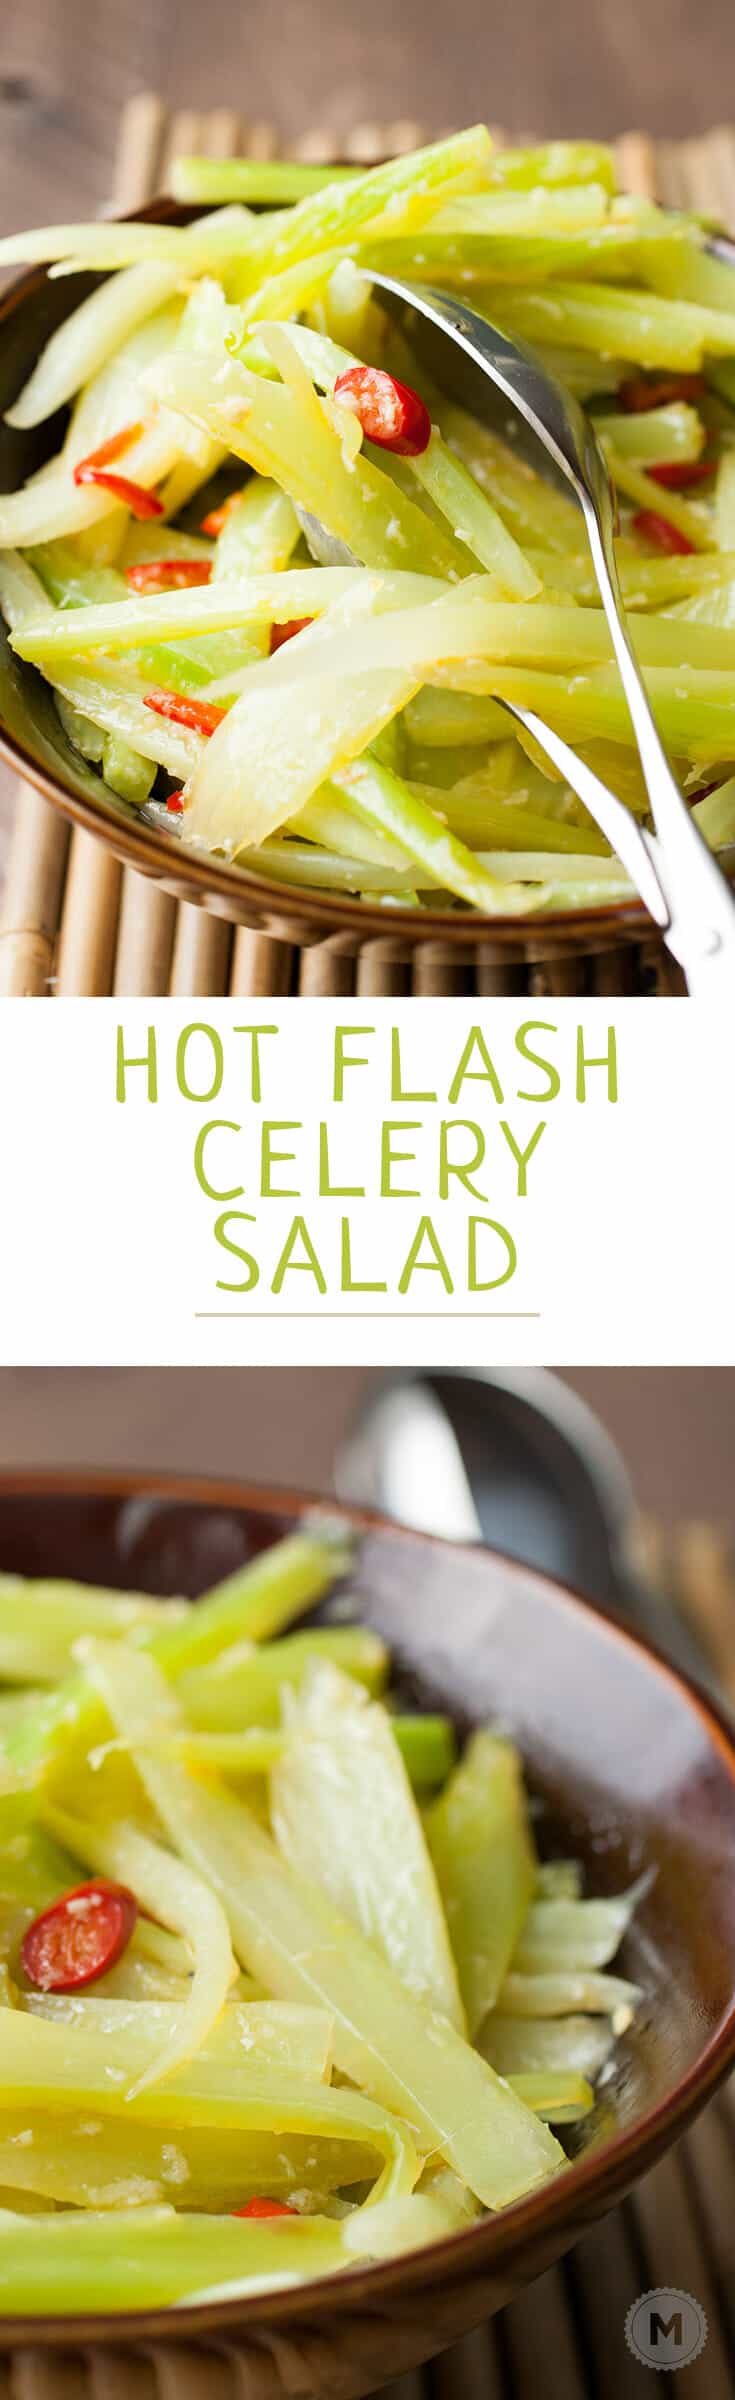 Hot Flash Celery Salad: One of my favorite new side dishes, flash cooked celery over high heat with a simple spicy and sweet dressing. Just a few ingredients and super delicious! | macheesmo.com